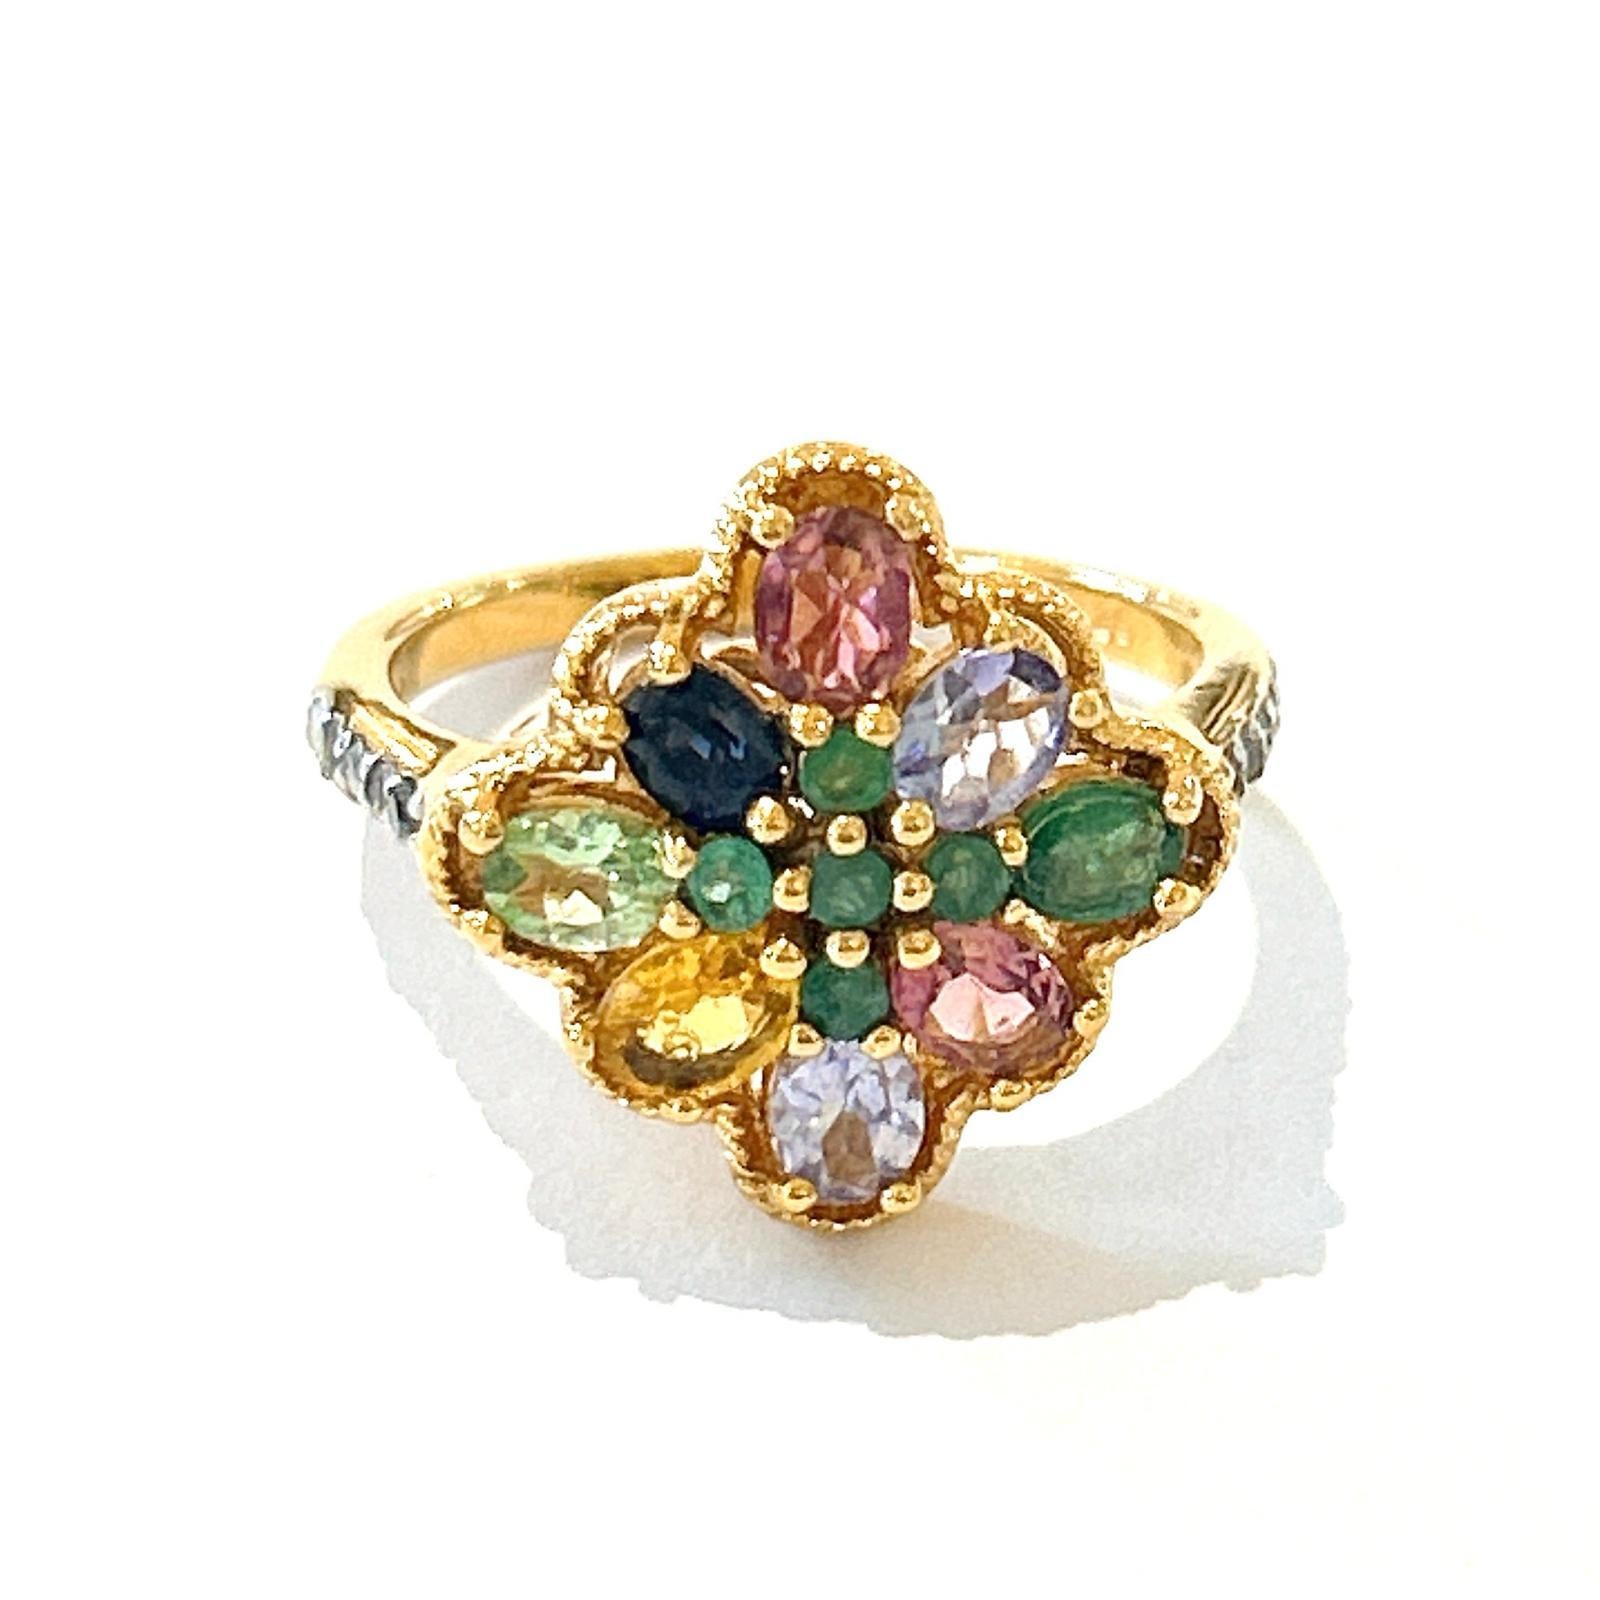 Bochic “Orient” Diamond & Multi Sapphire Vintage Cluster Ring Set 18K & Silver 

Blue natural sapphire 
Pink natural sapphire 
Yellow natural sapphire 
Green natural emeralds
Gray natural gray single cut diamonds 
5 carats 

This Ring is from the